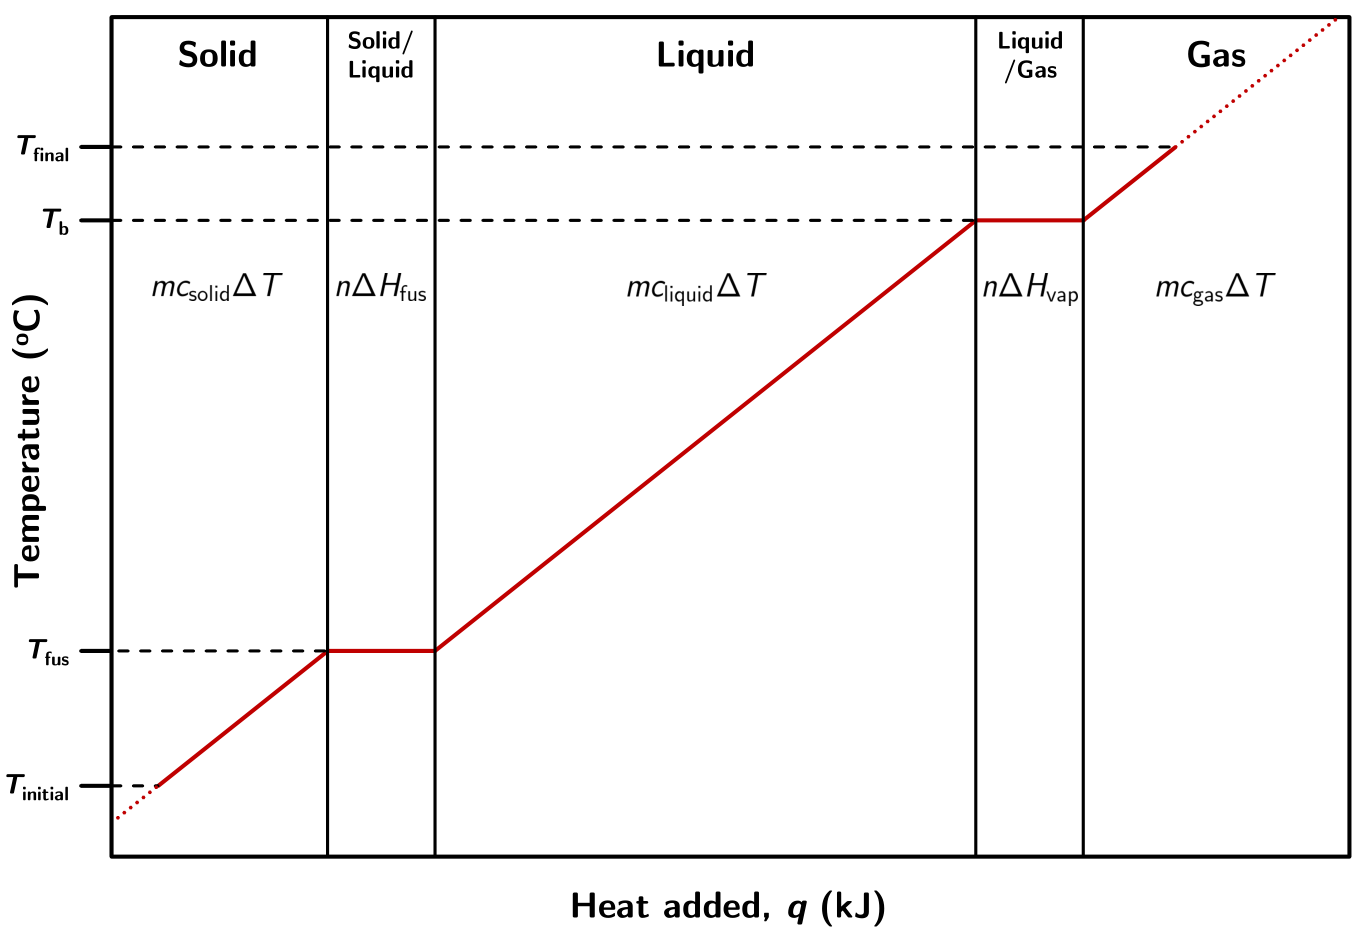 A typical heating curve diagram